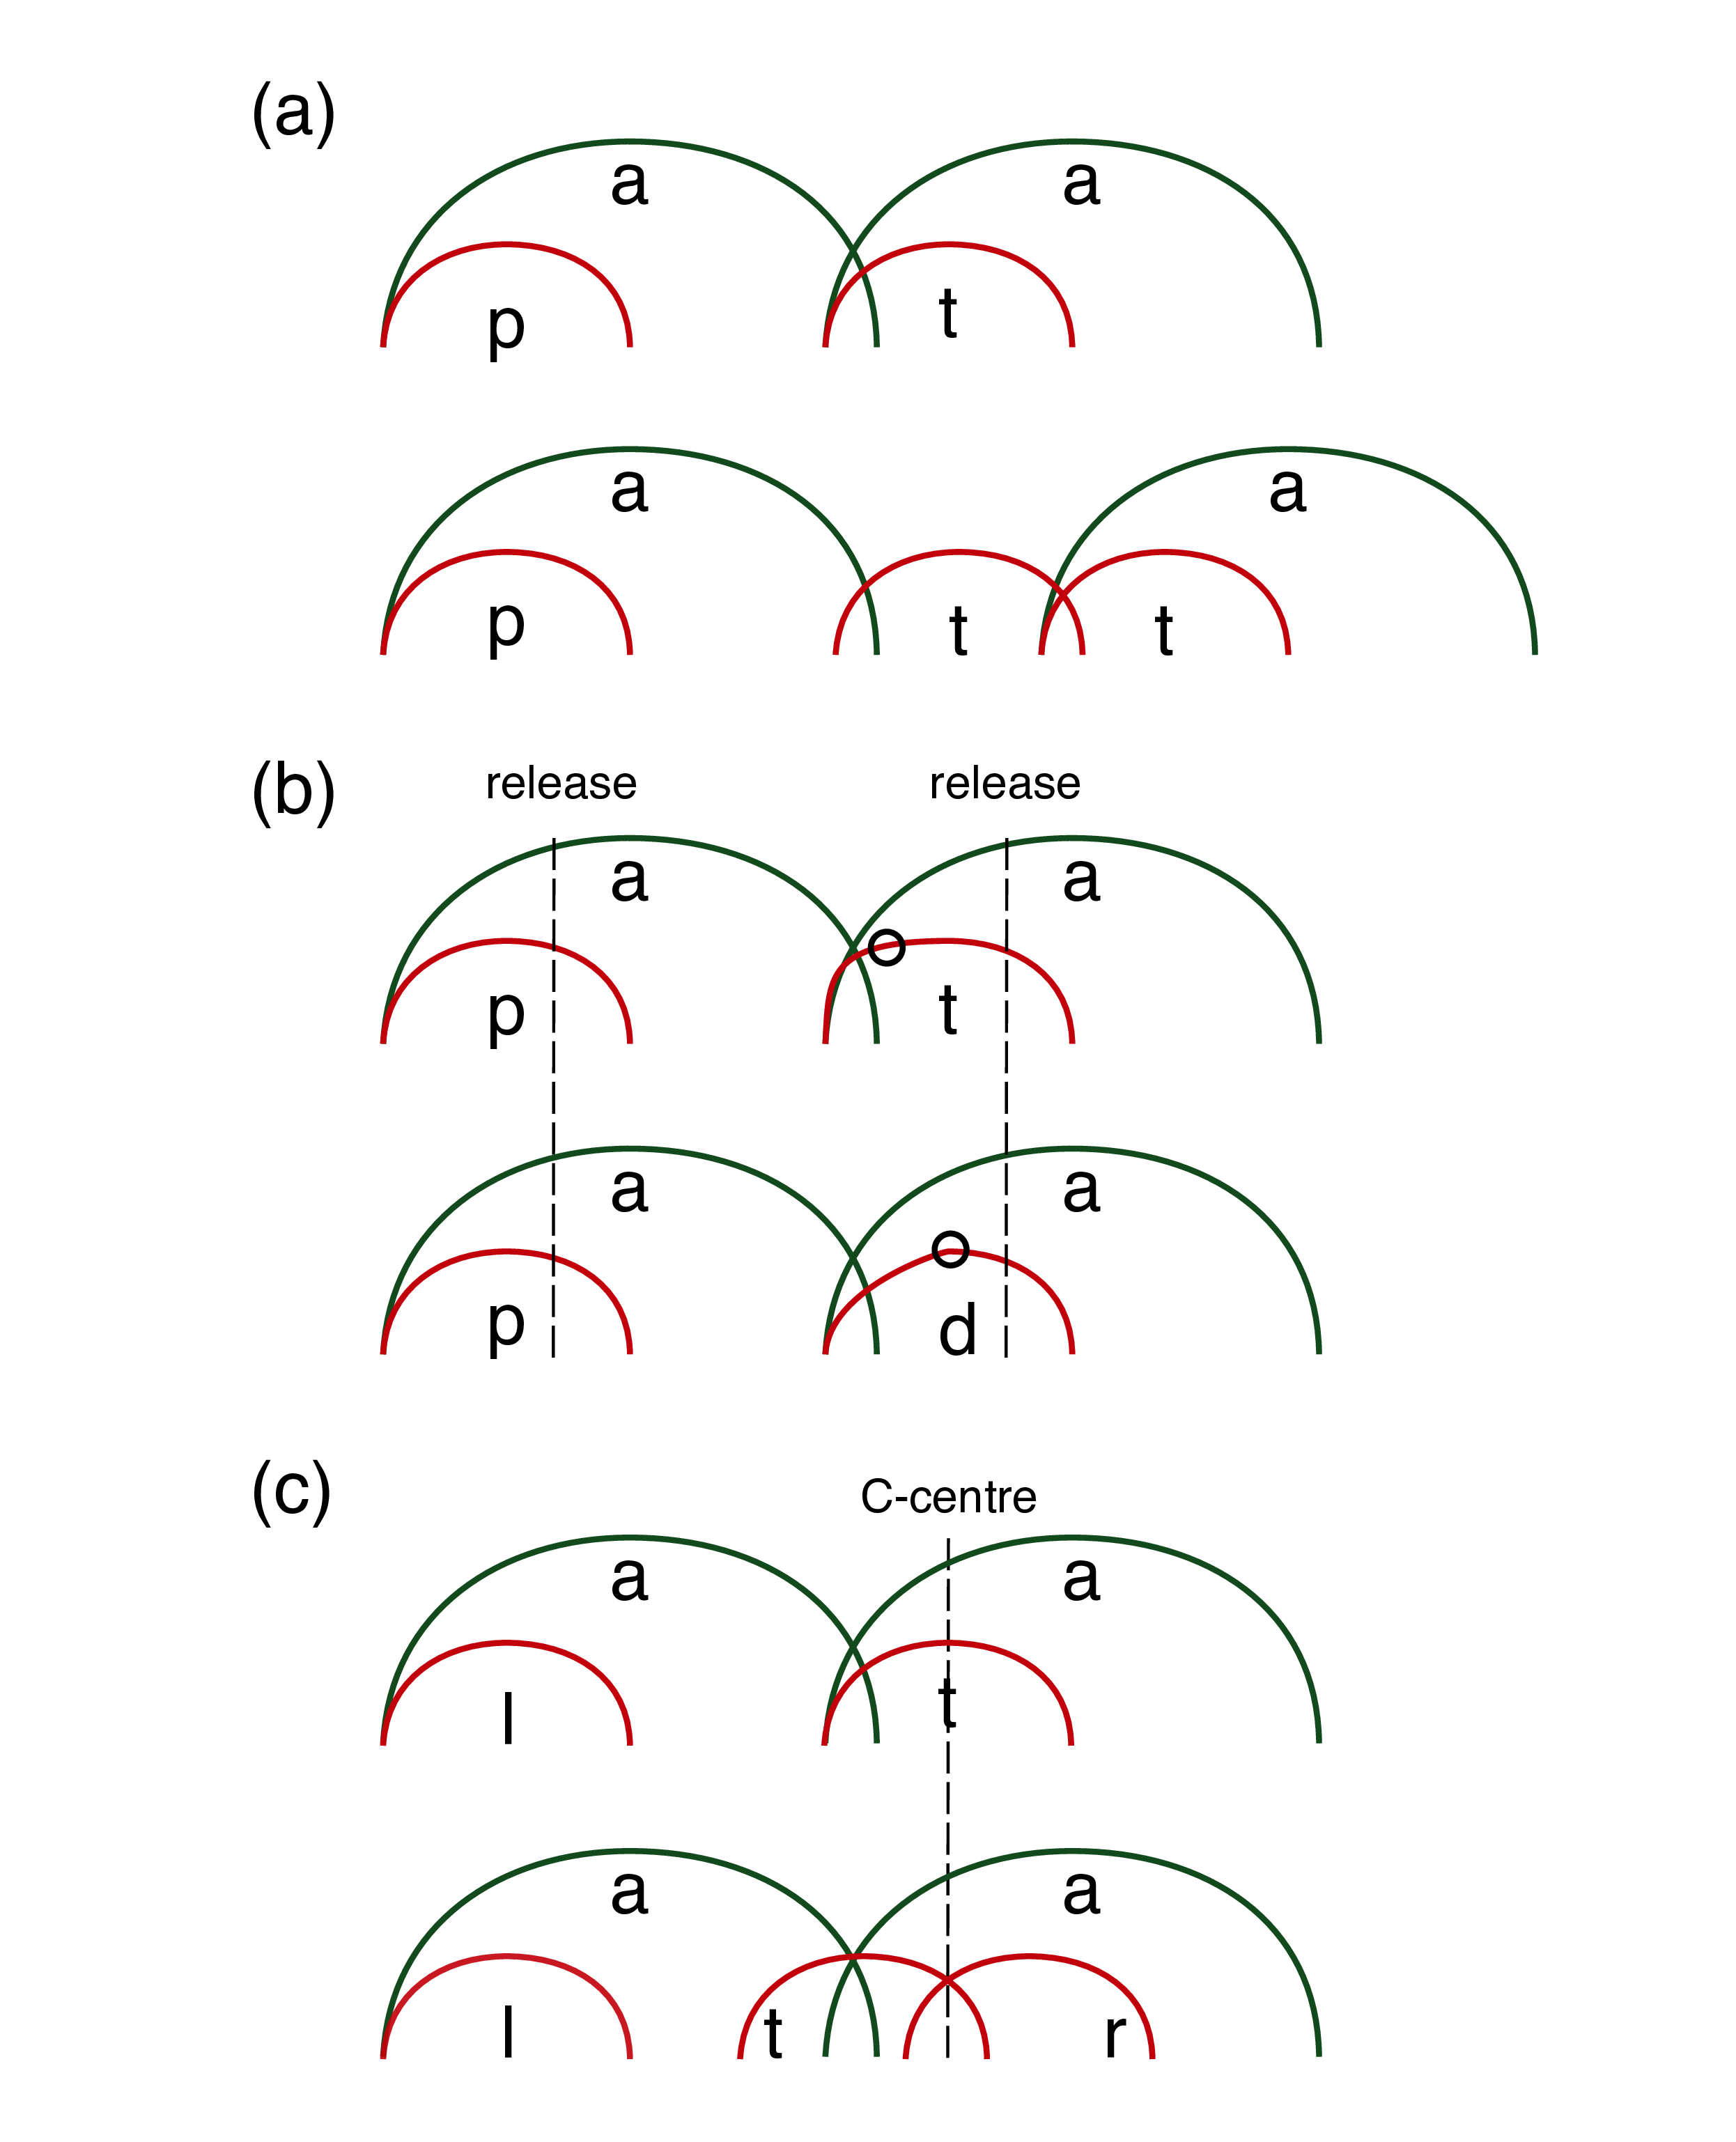 Schematics of the gestural phasing of vocalic and consonantal gestures in different contexts. The *x*-axis is time, while the *y*-axis can be interpreted as oral aperture for vowels and oral constriction for consonants. (a) shows singleton vs geminate stops, (b) voiceless and voiced stops, and (c) singleton vs tautosyllabic cluster. Note that in (a) the distance between the vowels increases in the geminate context, while it is stable in (b) and (c). The circles in (b) on the consonant gesture lines indicate the time of closure onset.